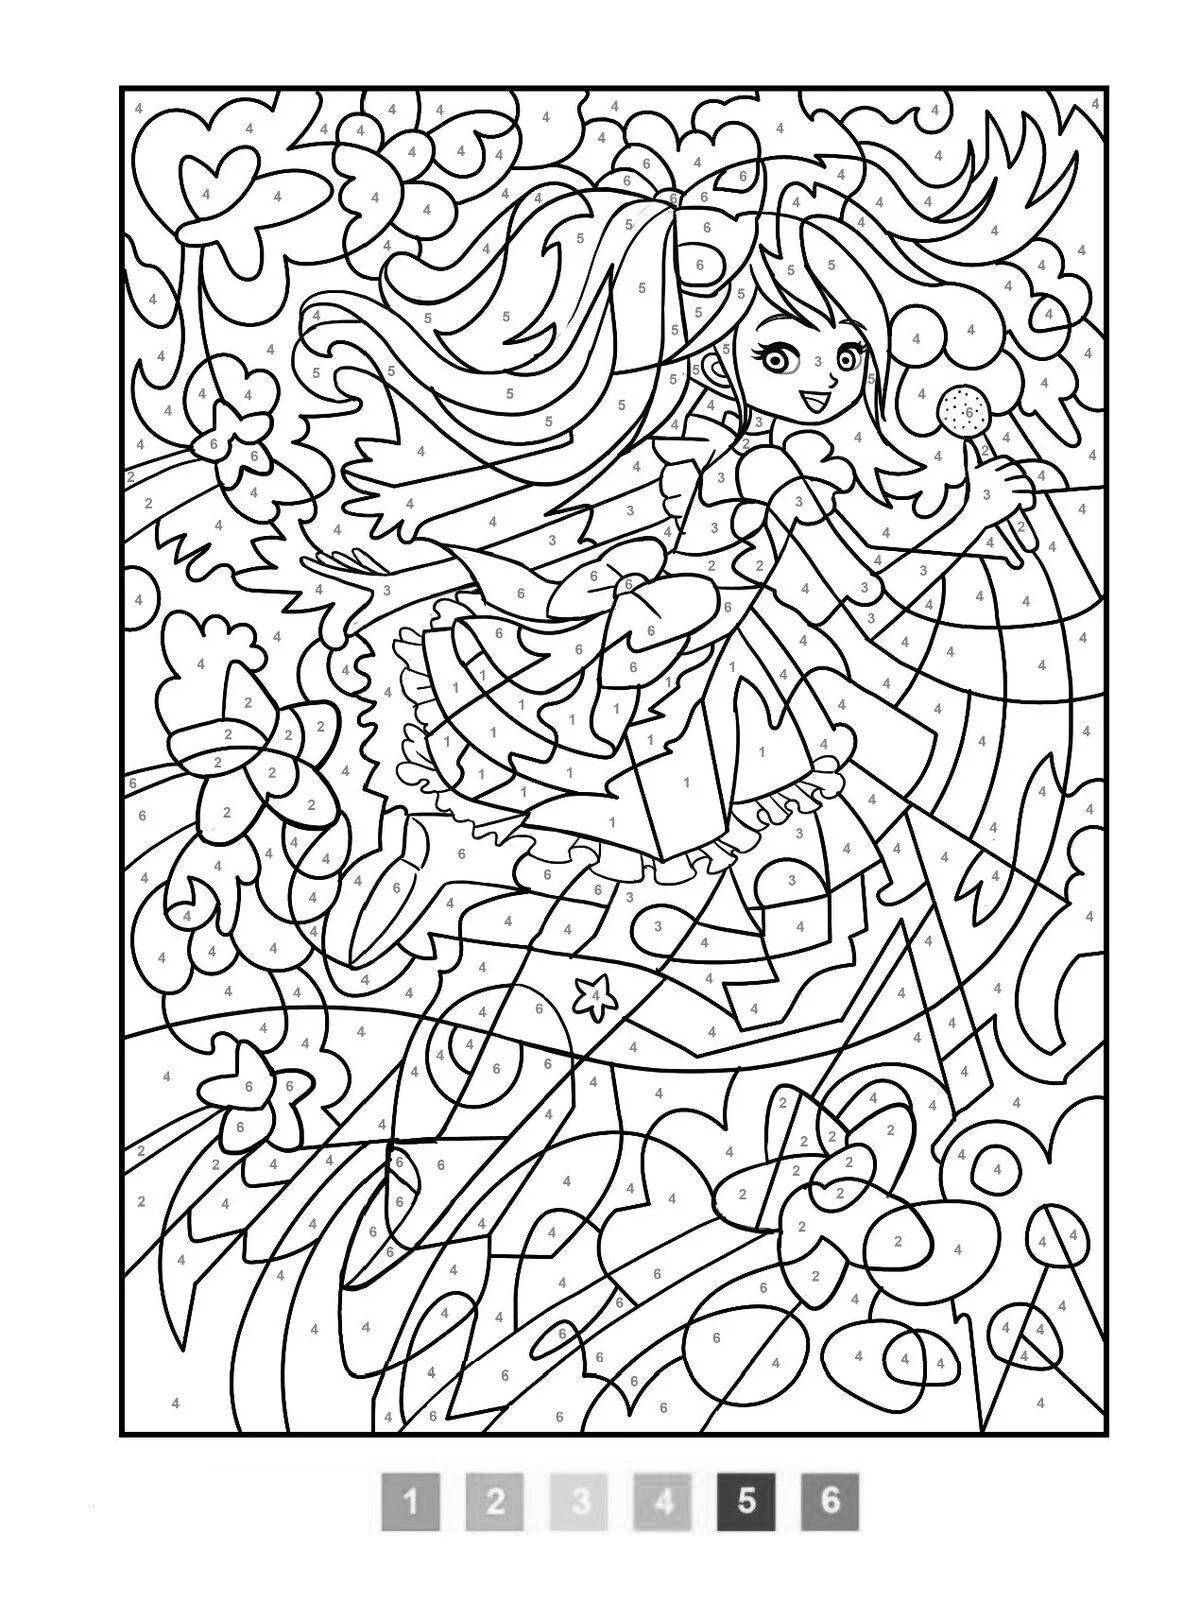 Load by Number Charming Coloring Page